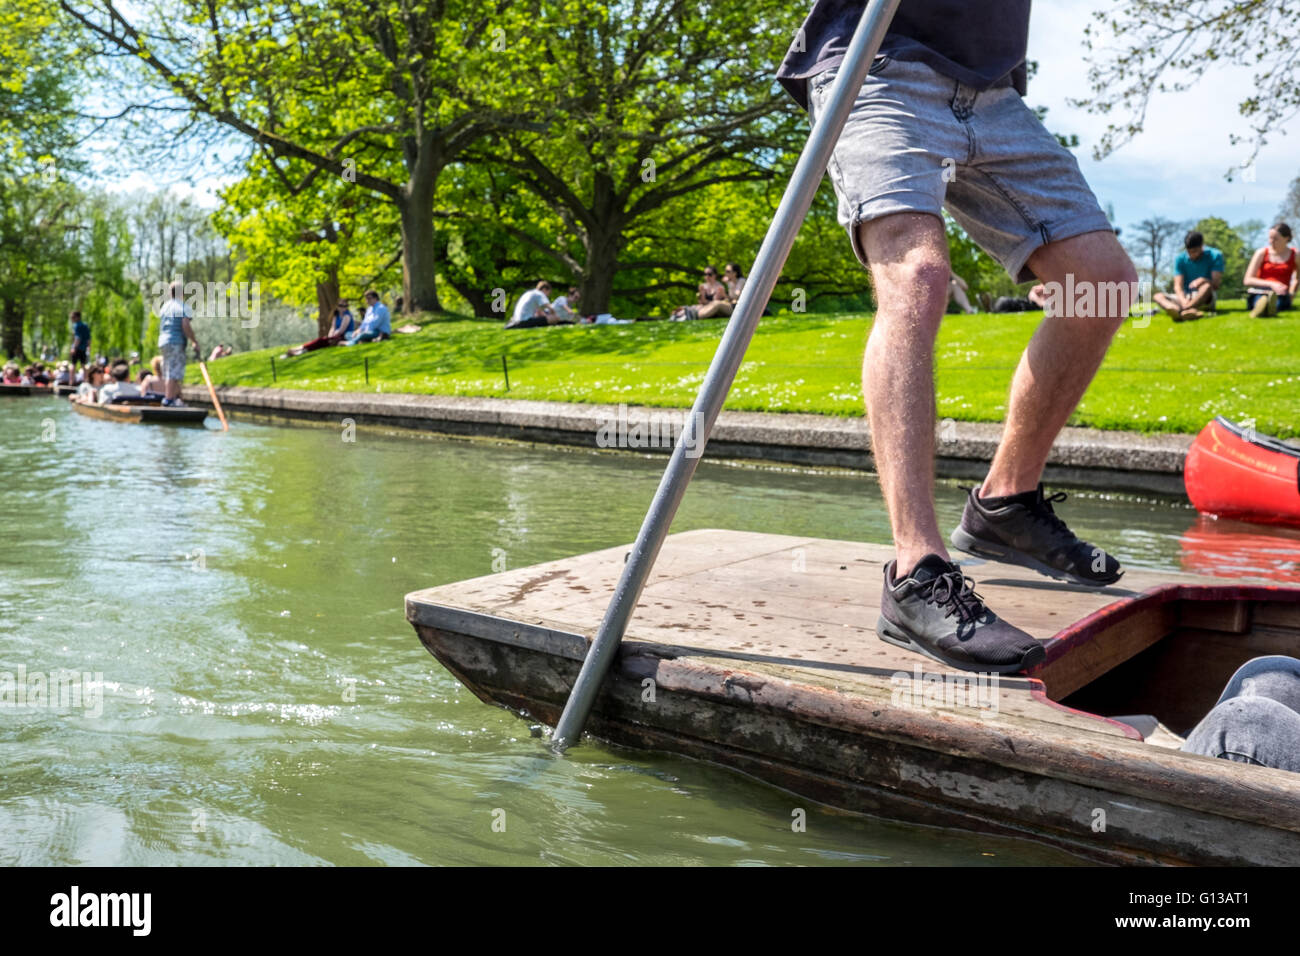 A punting guide strokes the punt along the green Cam River on a day filled with tourism, fun, excitement. Stock Photo